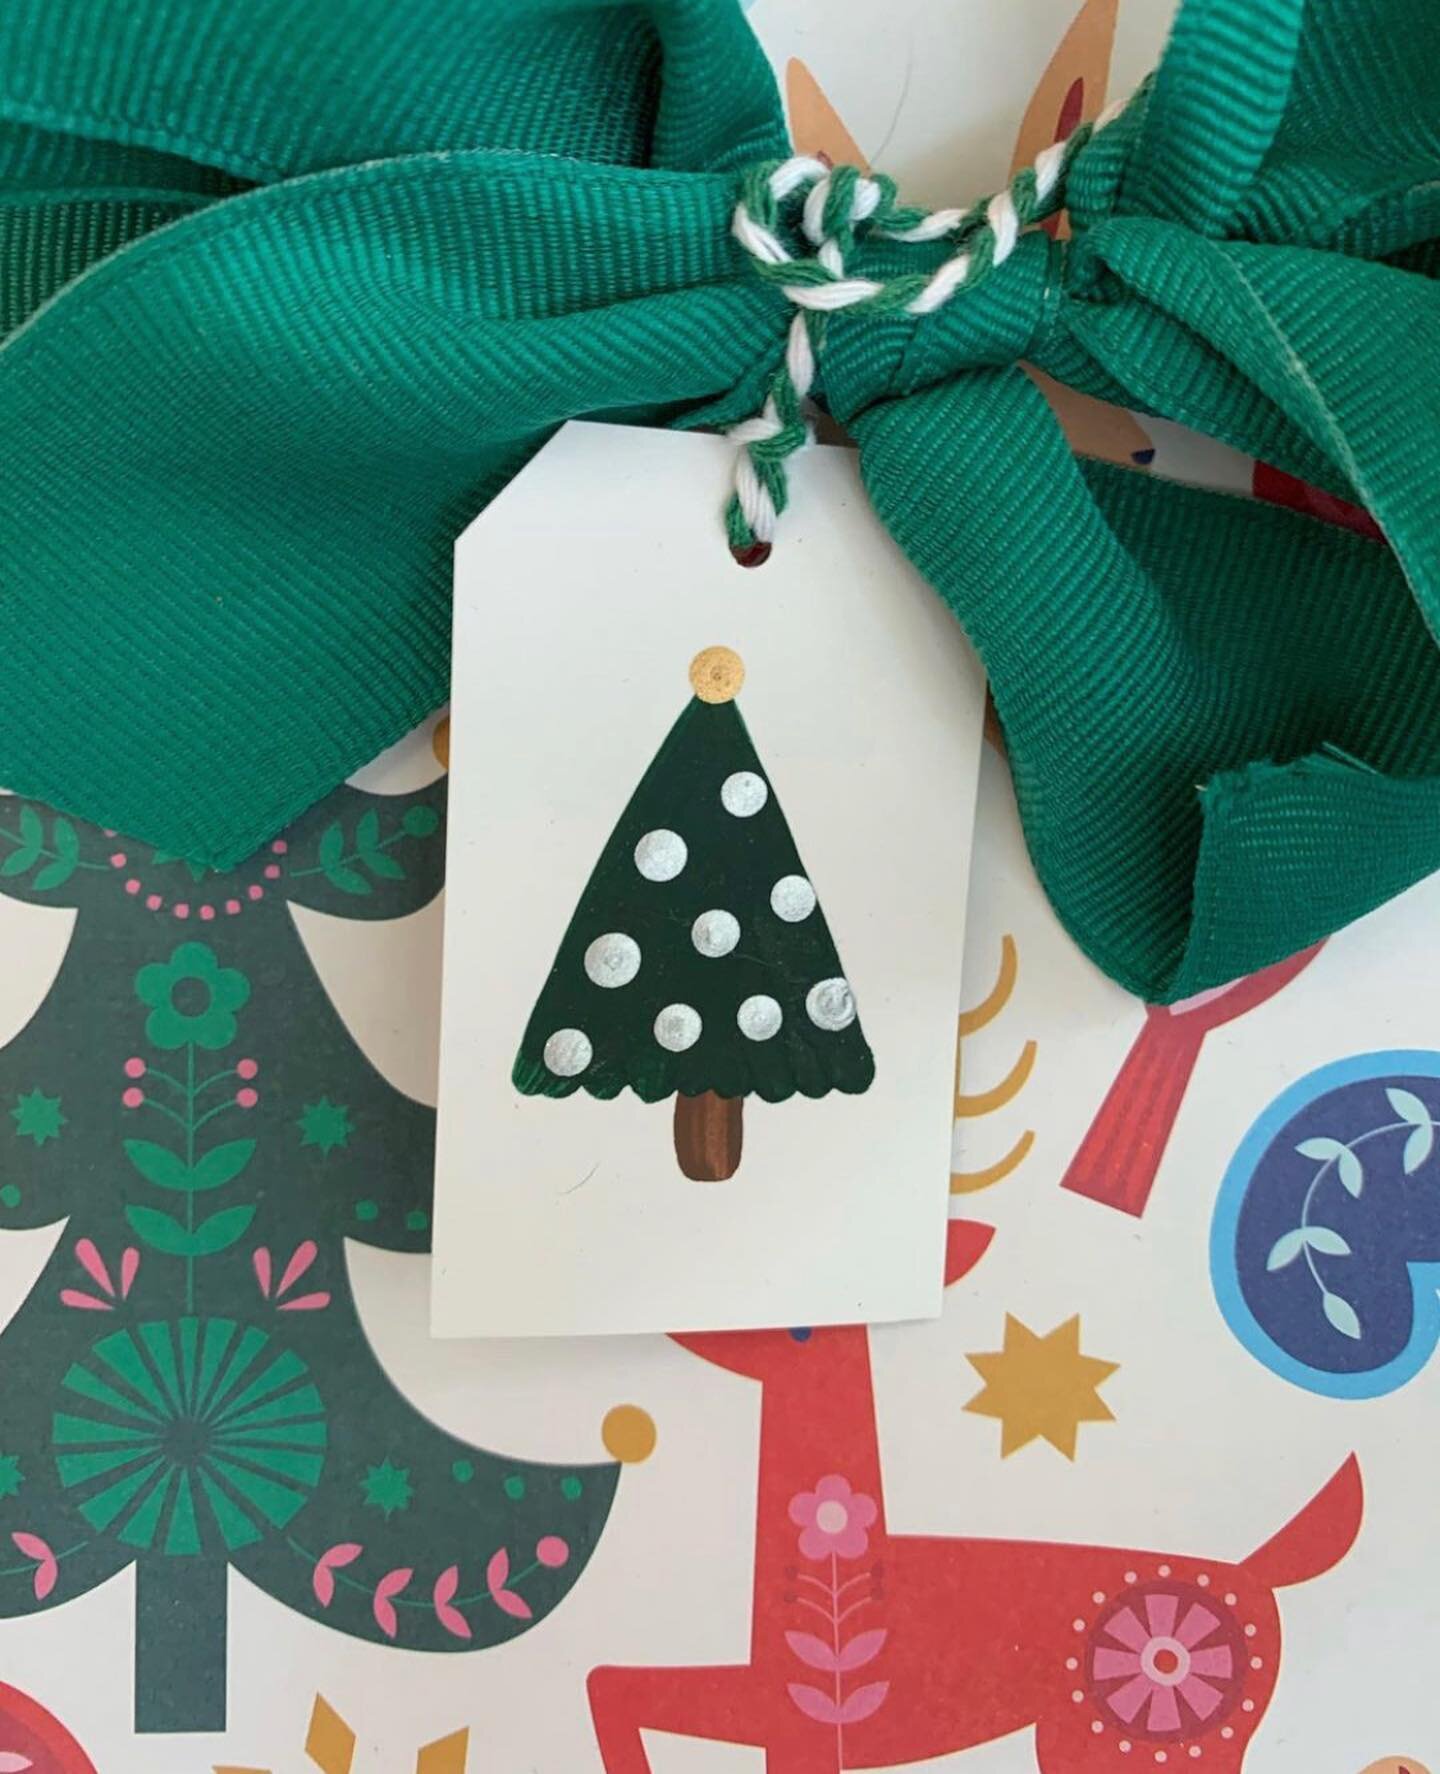 For this year&rsquo;s holiday pop up shop, we&rsquo;ll be launching new printed tag designs and will have a few of the hand-painted dot tags available.

Trees, ornaments, and snowflakes are now available by custom order only ($3 each). Please message